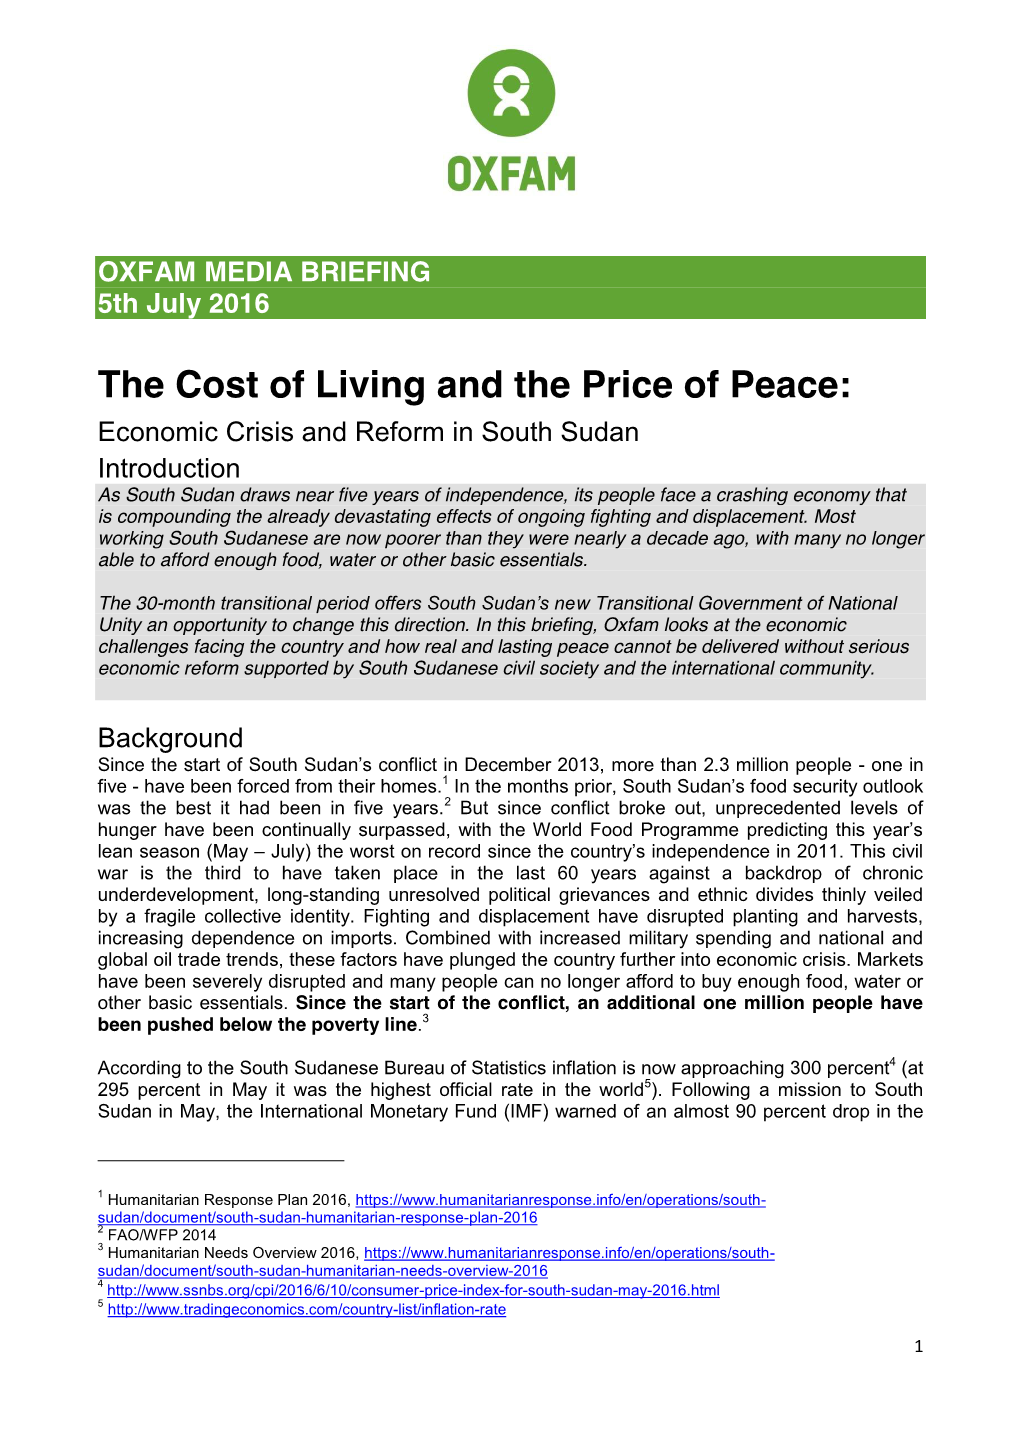 The Cost of Living and the Price of Peace